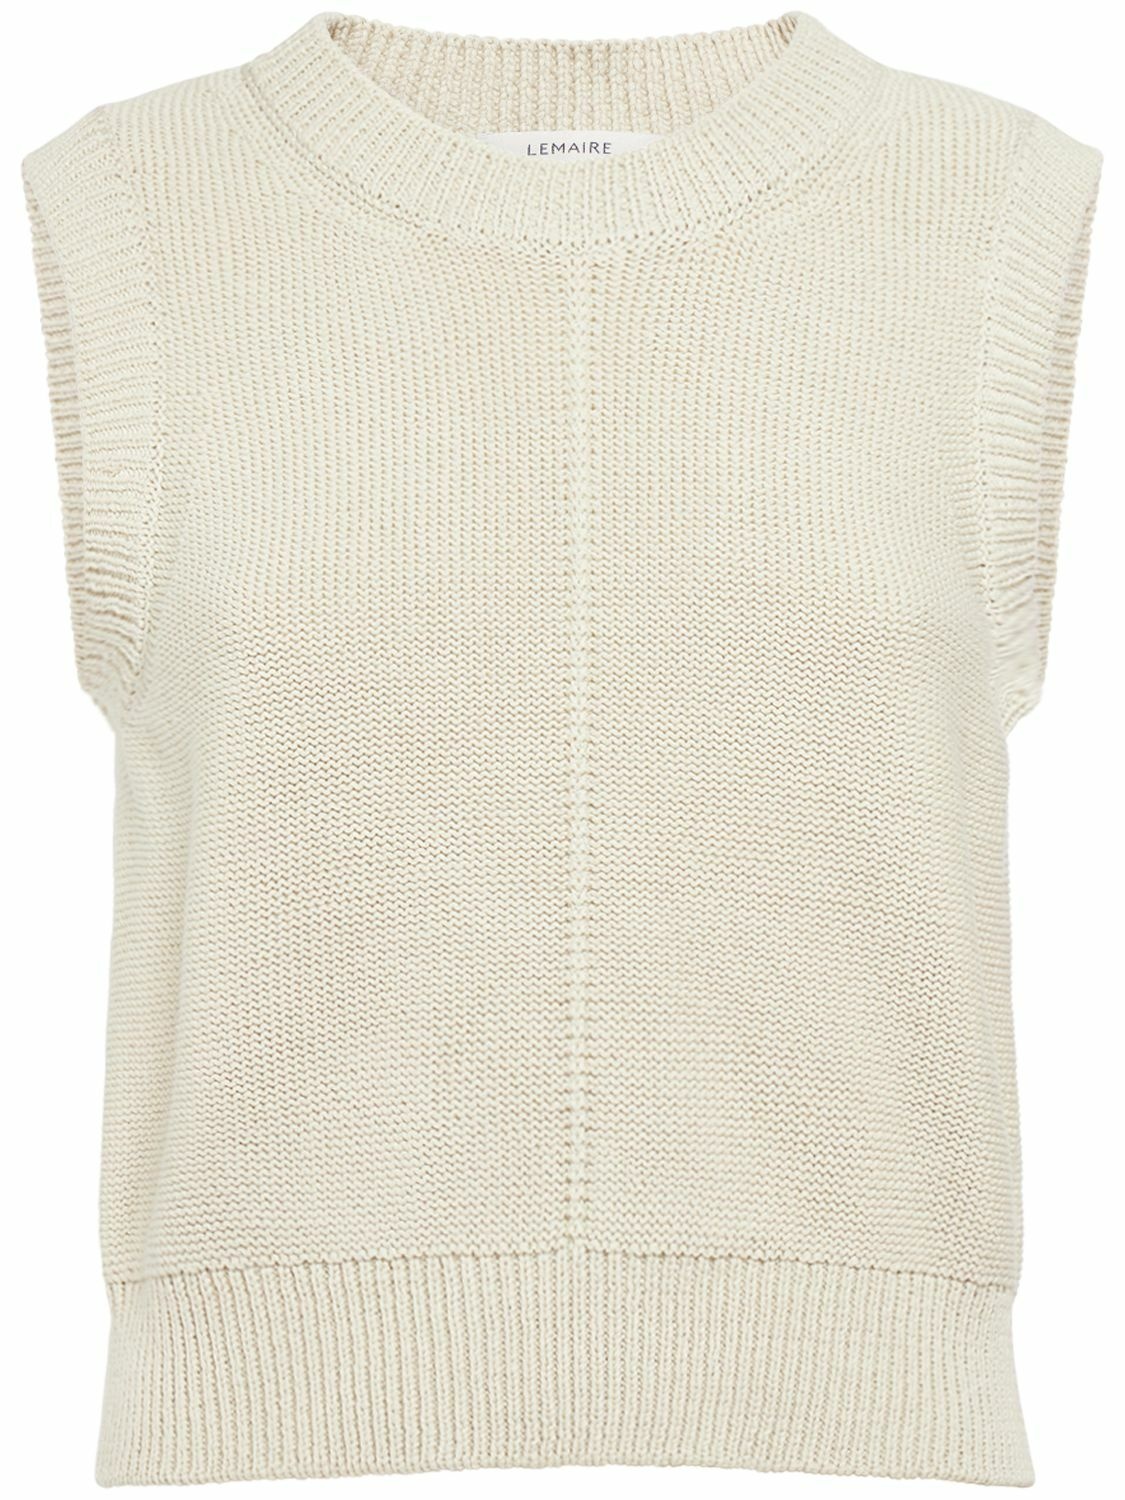 Photo: LEMAIRE - Sleeveless Cropped Cotton Knit Sweater